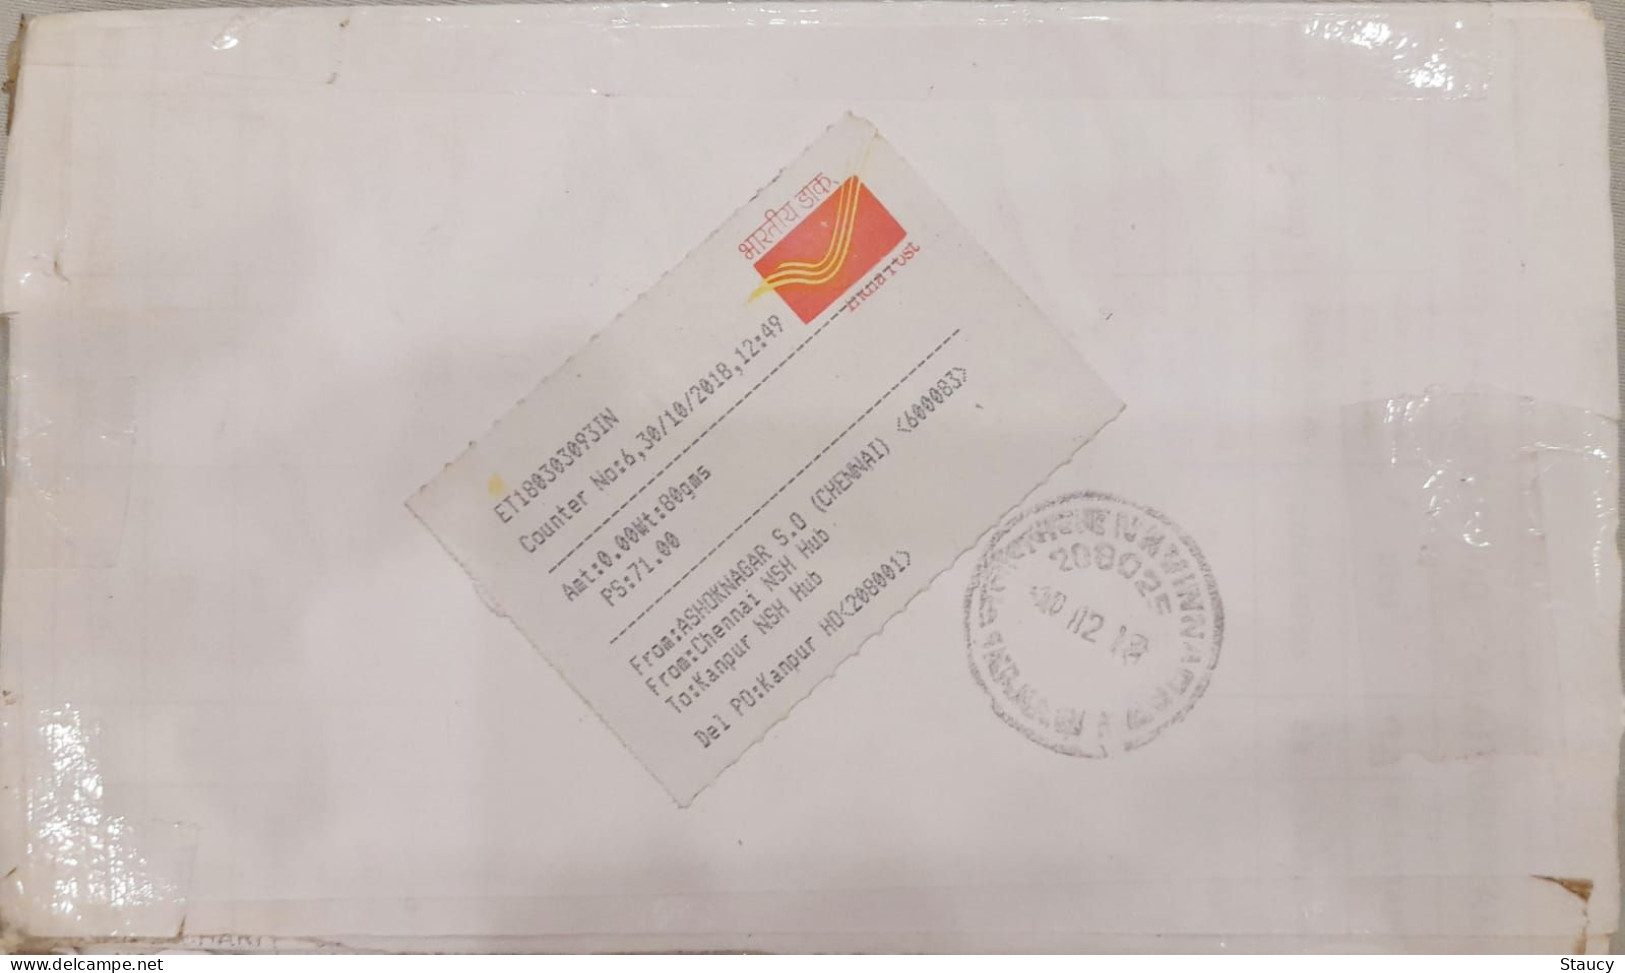 INDIA 2018 Mahatma Gandhi Round Odd Shaped & Swami Vivekananda Stamps Franked On Registered Speed Post Cover As Per Scan - Covers & Documents